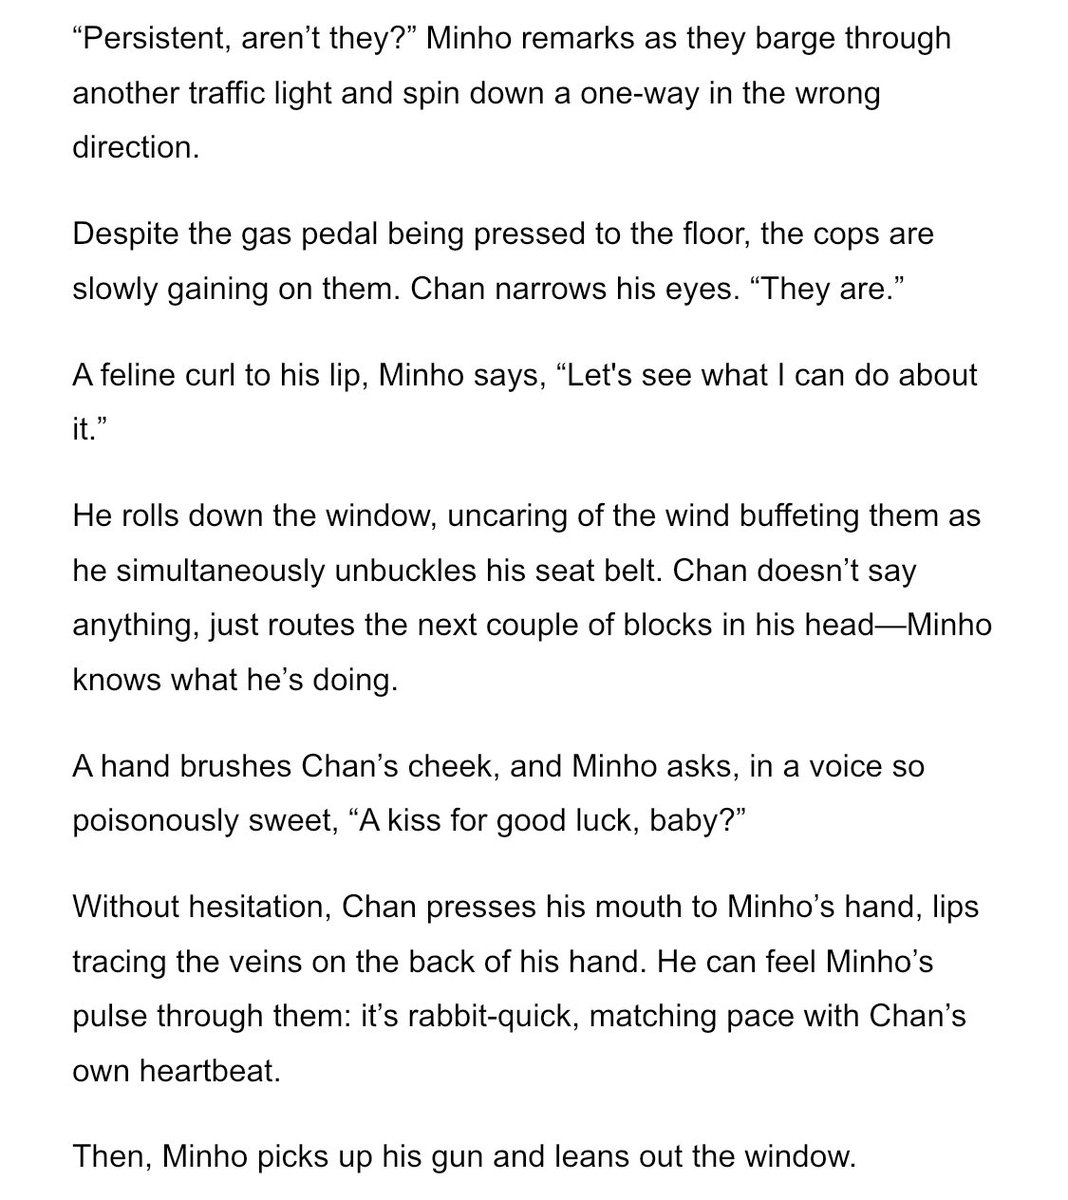 happy wipwed y’all! have some mnchn being gay and doing crime! full pwp will be posted later this week 😉